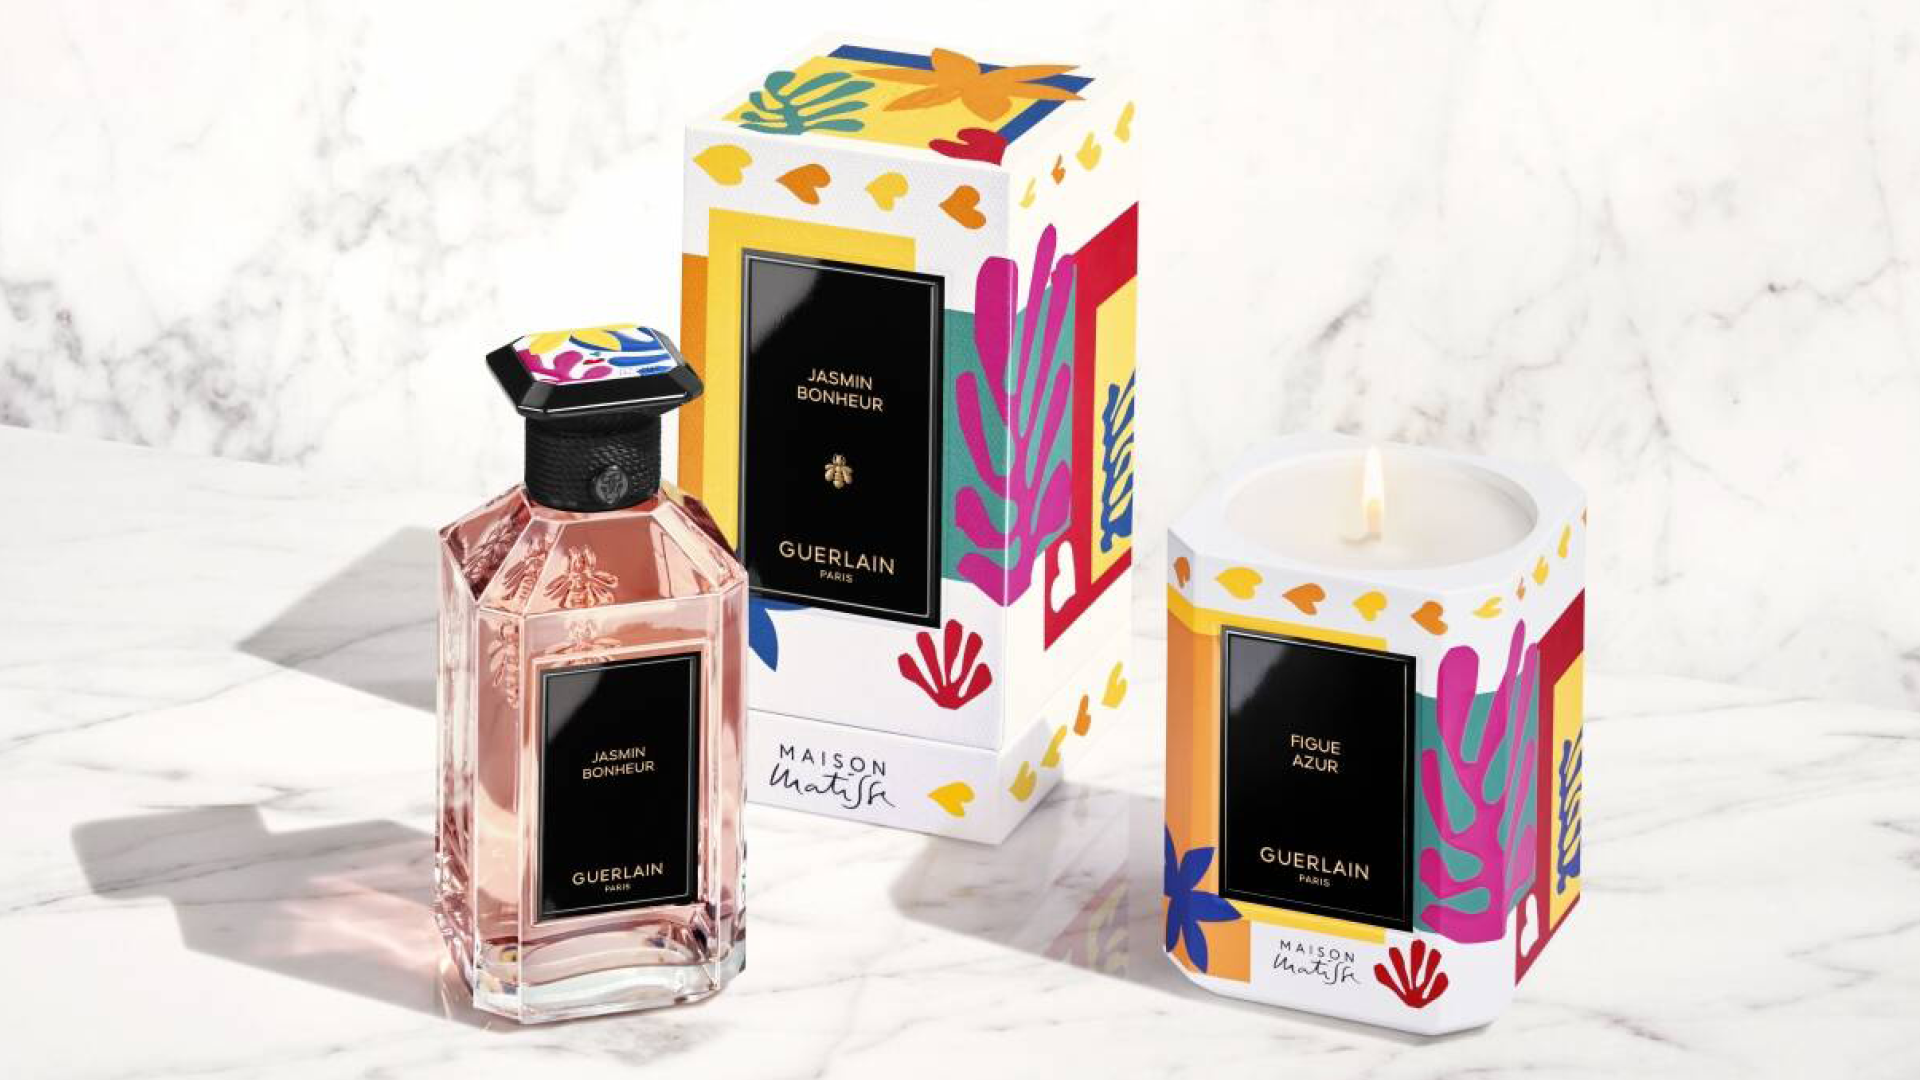 Mindscent fragrance finder inspired by Guerlain brings a new perfume  experience to Guerlain boutiques - LVMH